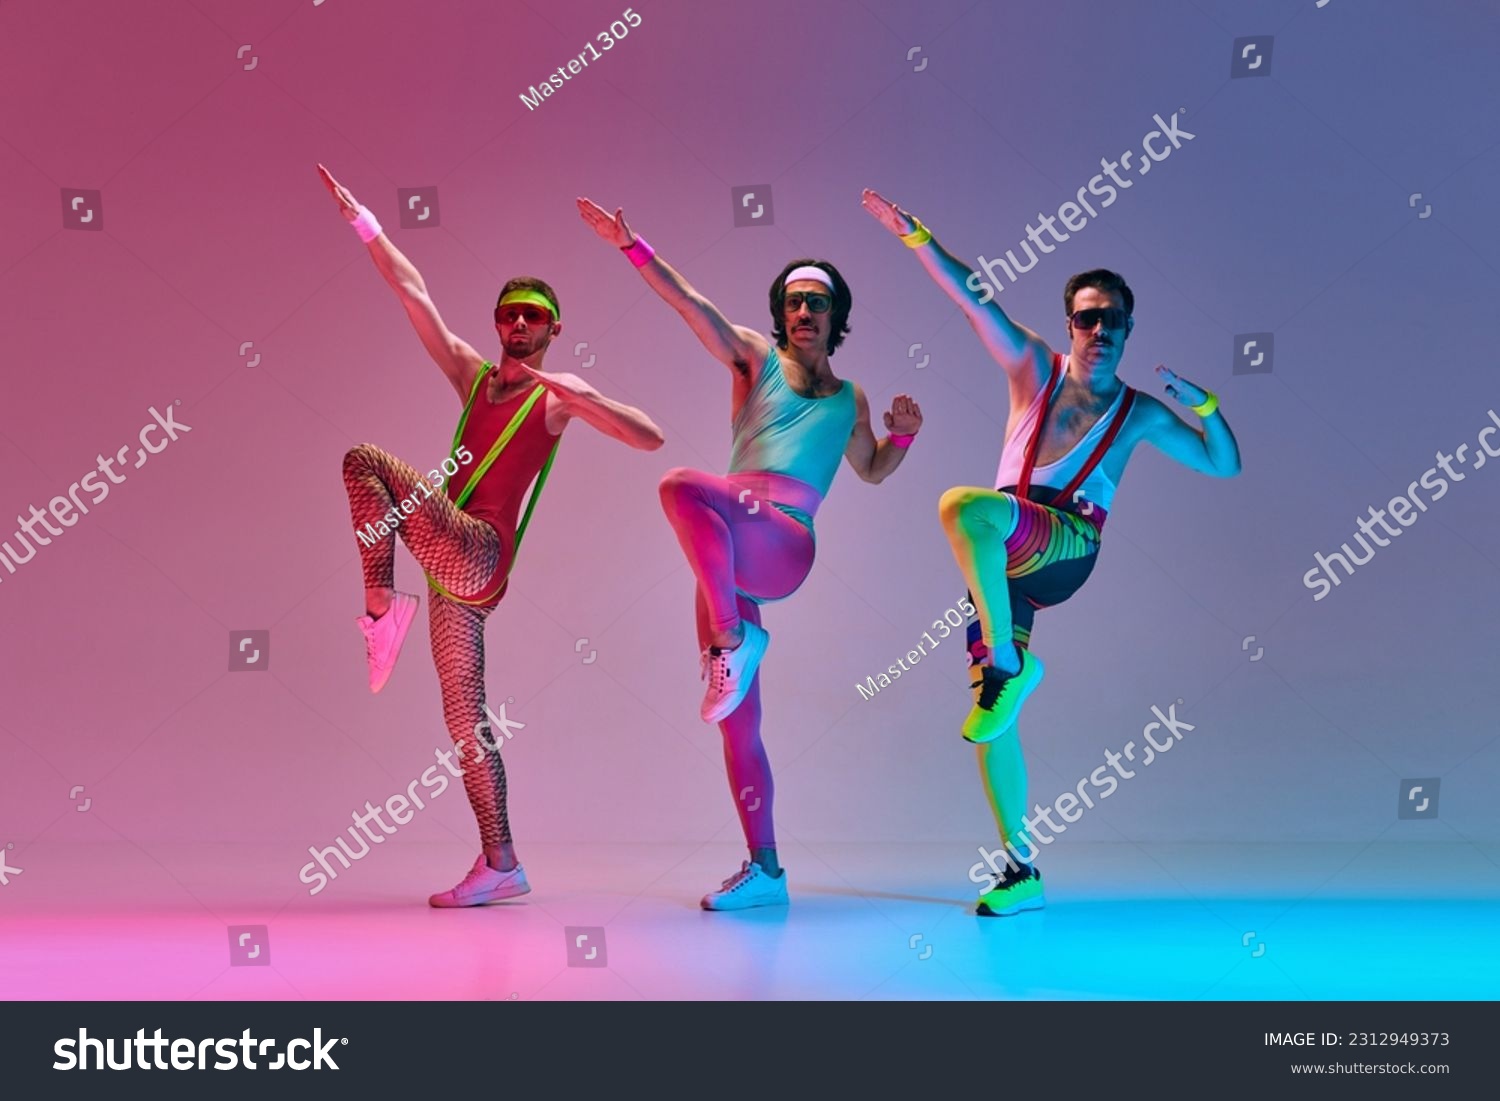 Athletic, funny men in retro colorful sportswear training, doing exercises against gradient blue pink studio background in neon light. Concept of sportive and active lifestyle, humor, retro style. Ad #2312949373